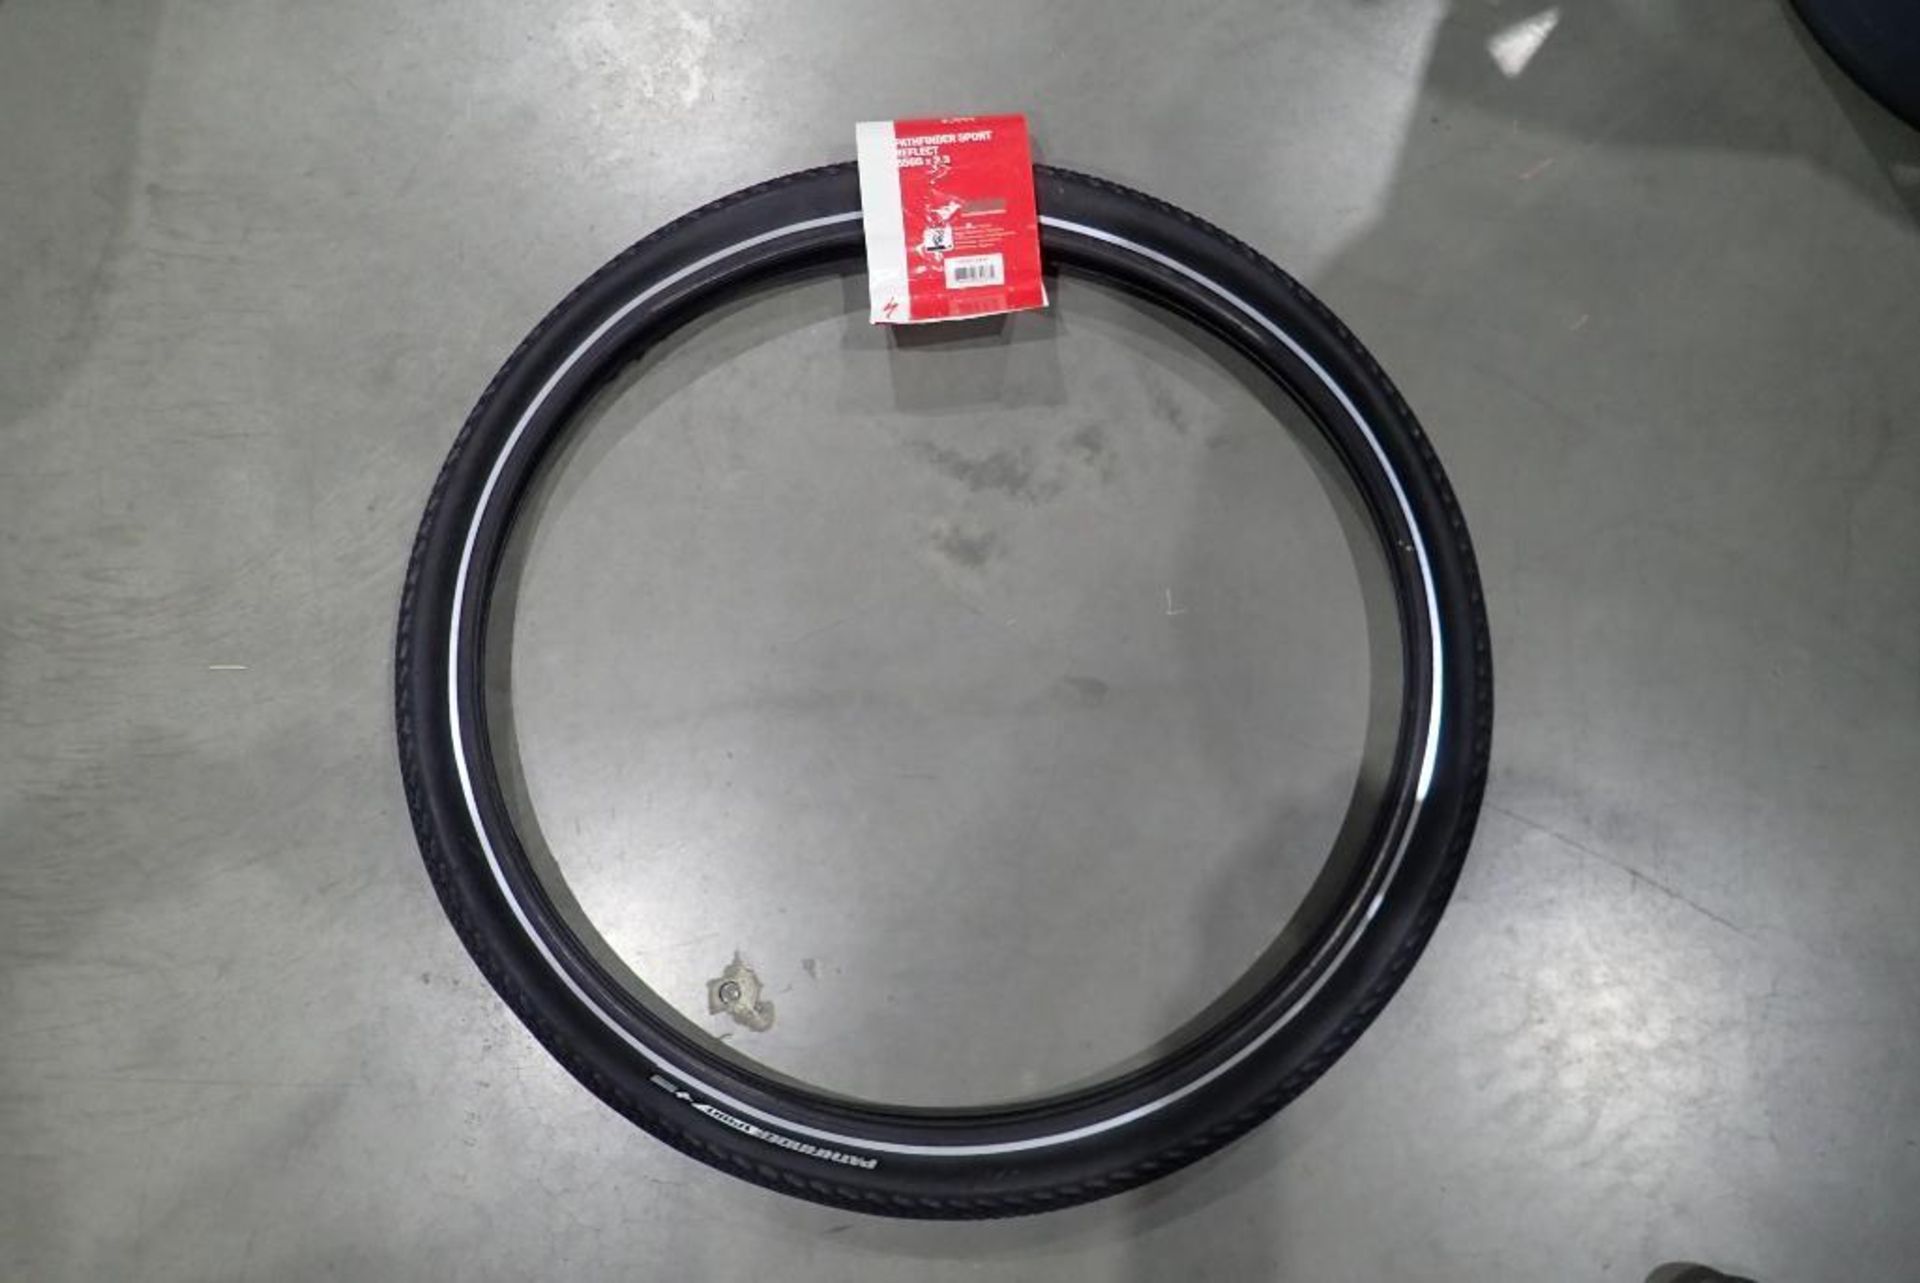 Lot of (6) Specialized Pathfinder Sport Reflect Tires Black 650B 2.3in.